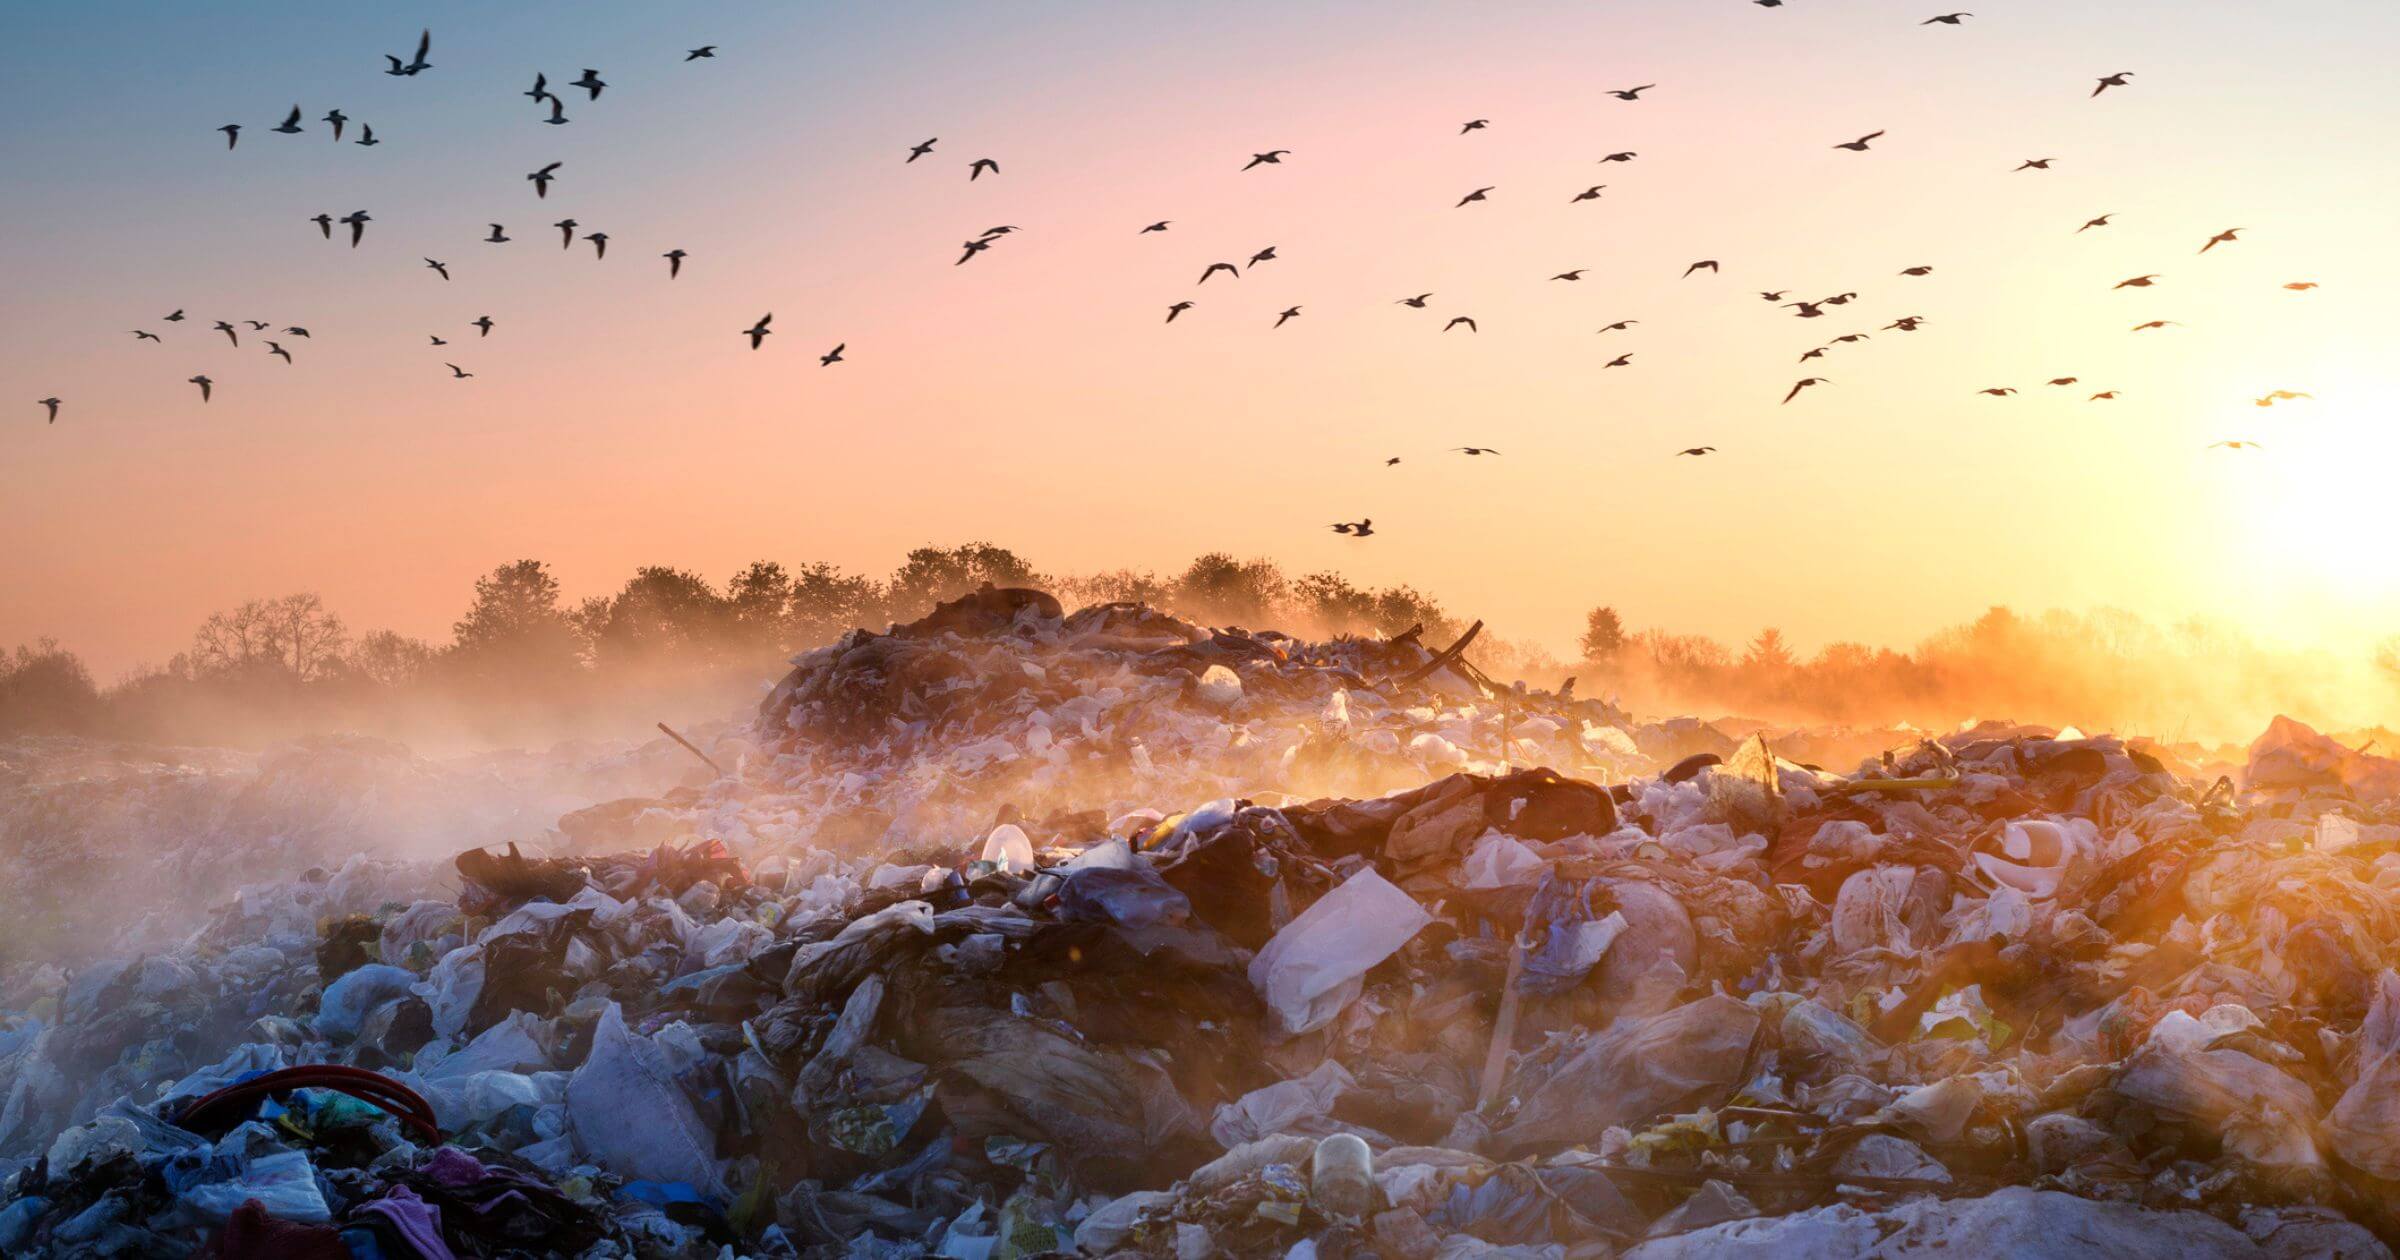 Birds flying over a dump site with lots of trash and a golden sunset above